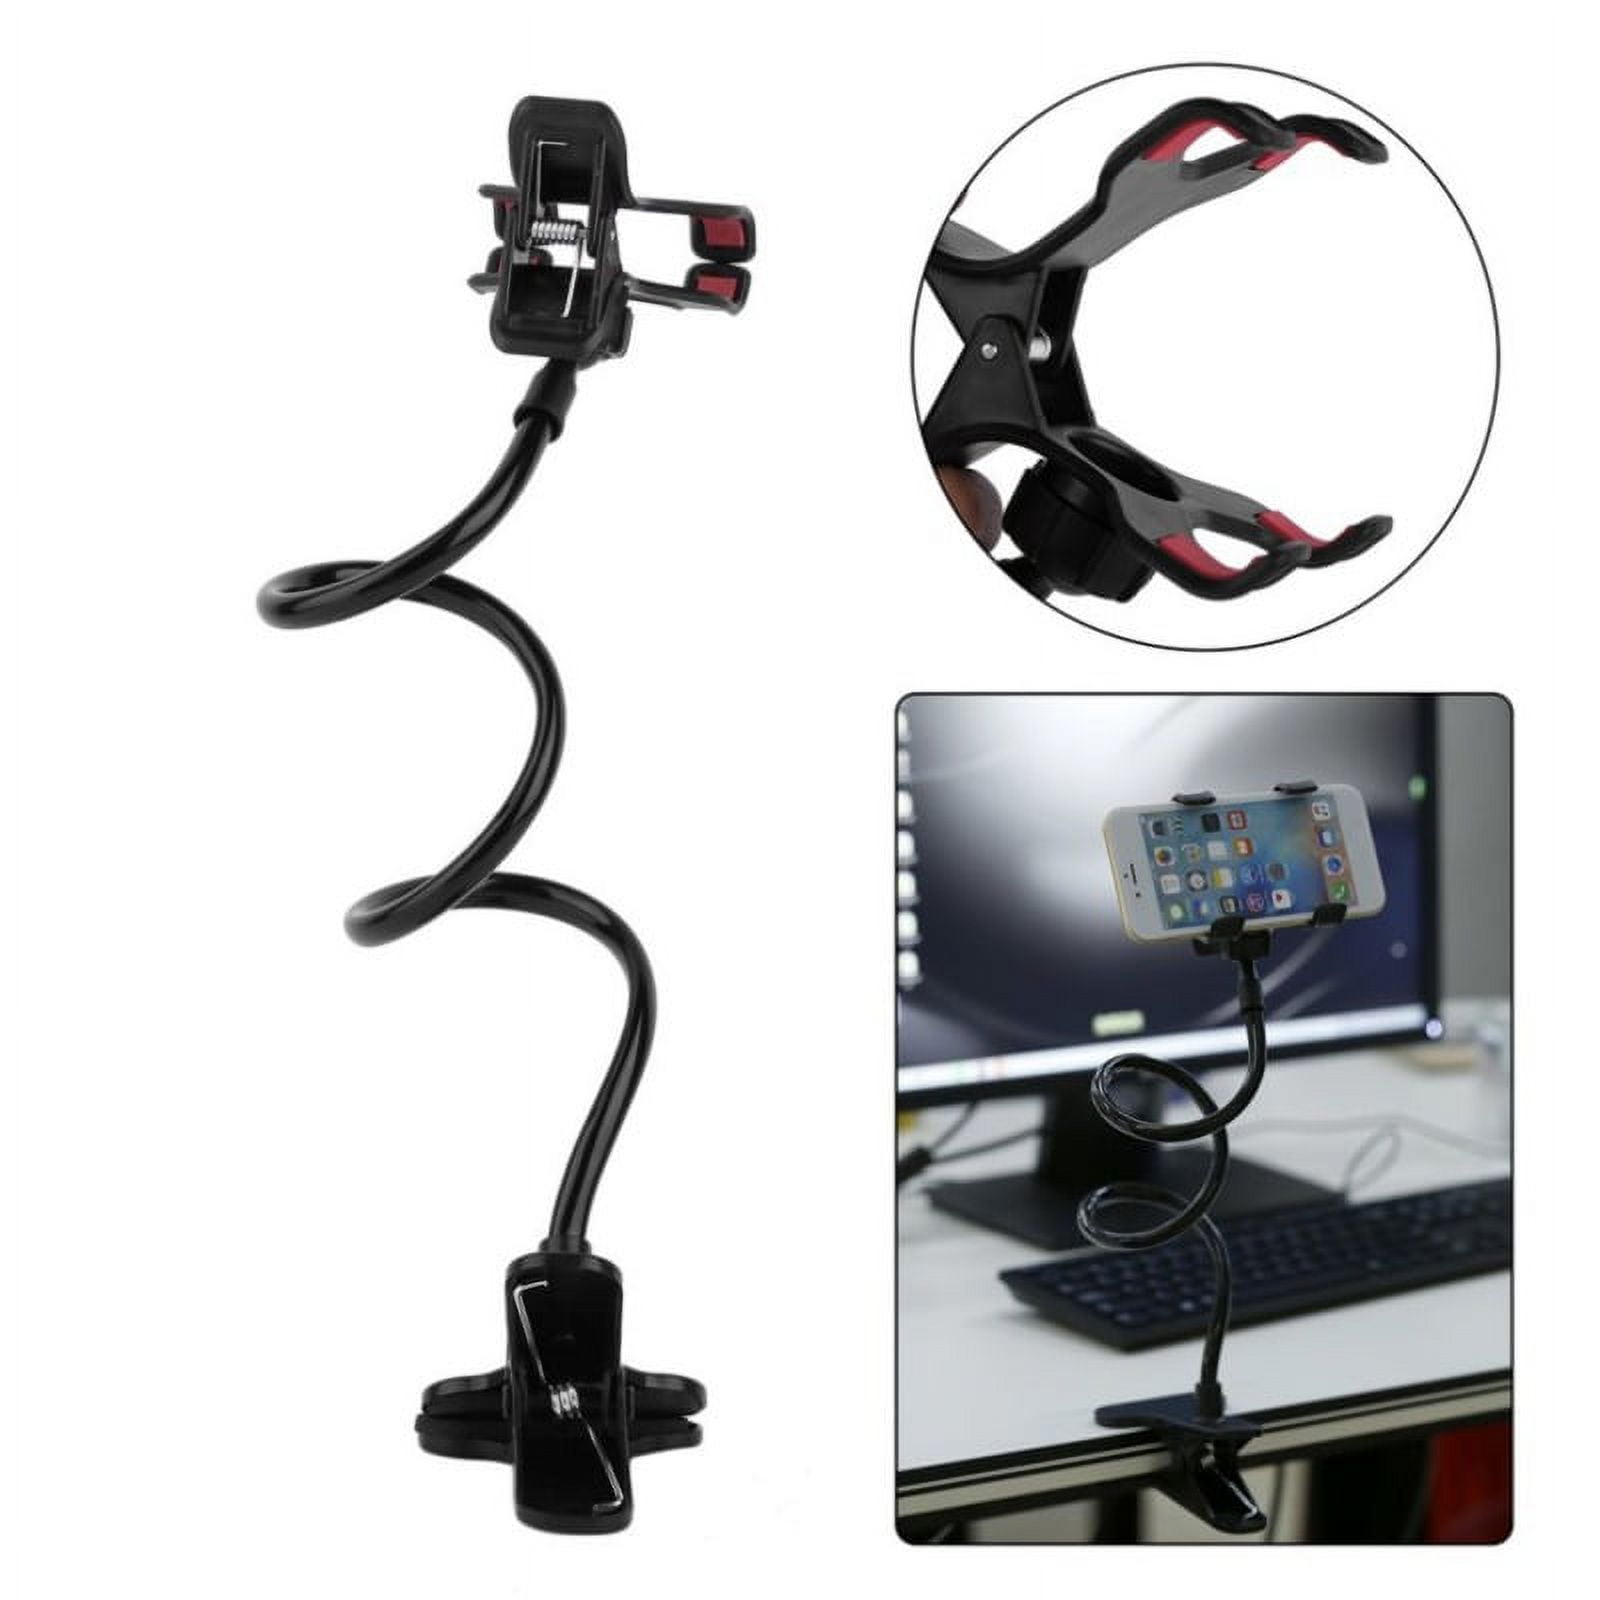 Macally Adjustable Gooseneck Tablet Holder & Phone Clip - Works with Phones  & Tablets up to 8 - Flexible Phone Holder & Tablet Mount with Clip On